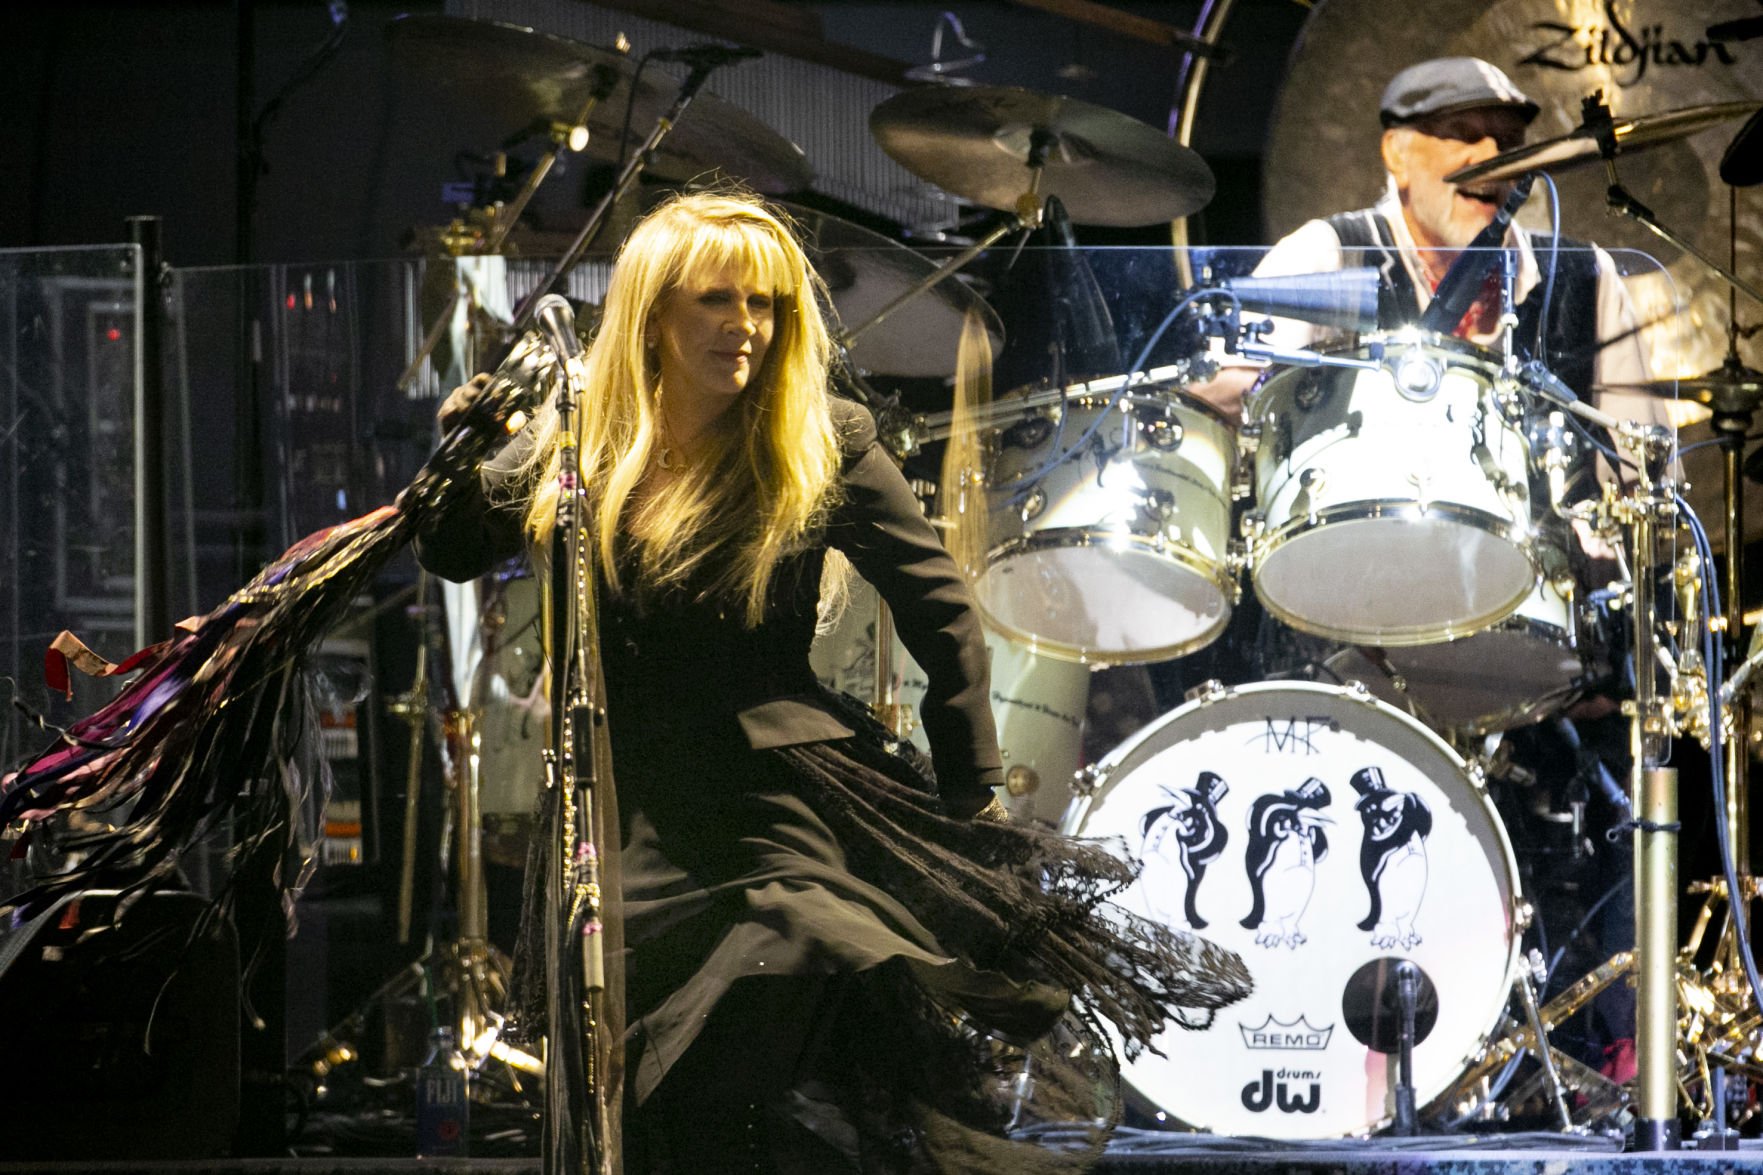 who is the bass player for fleetwood mac